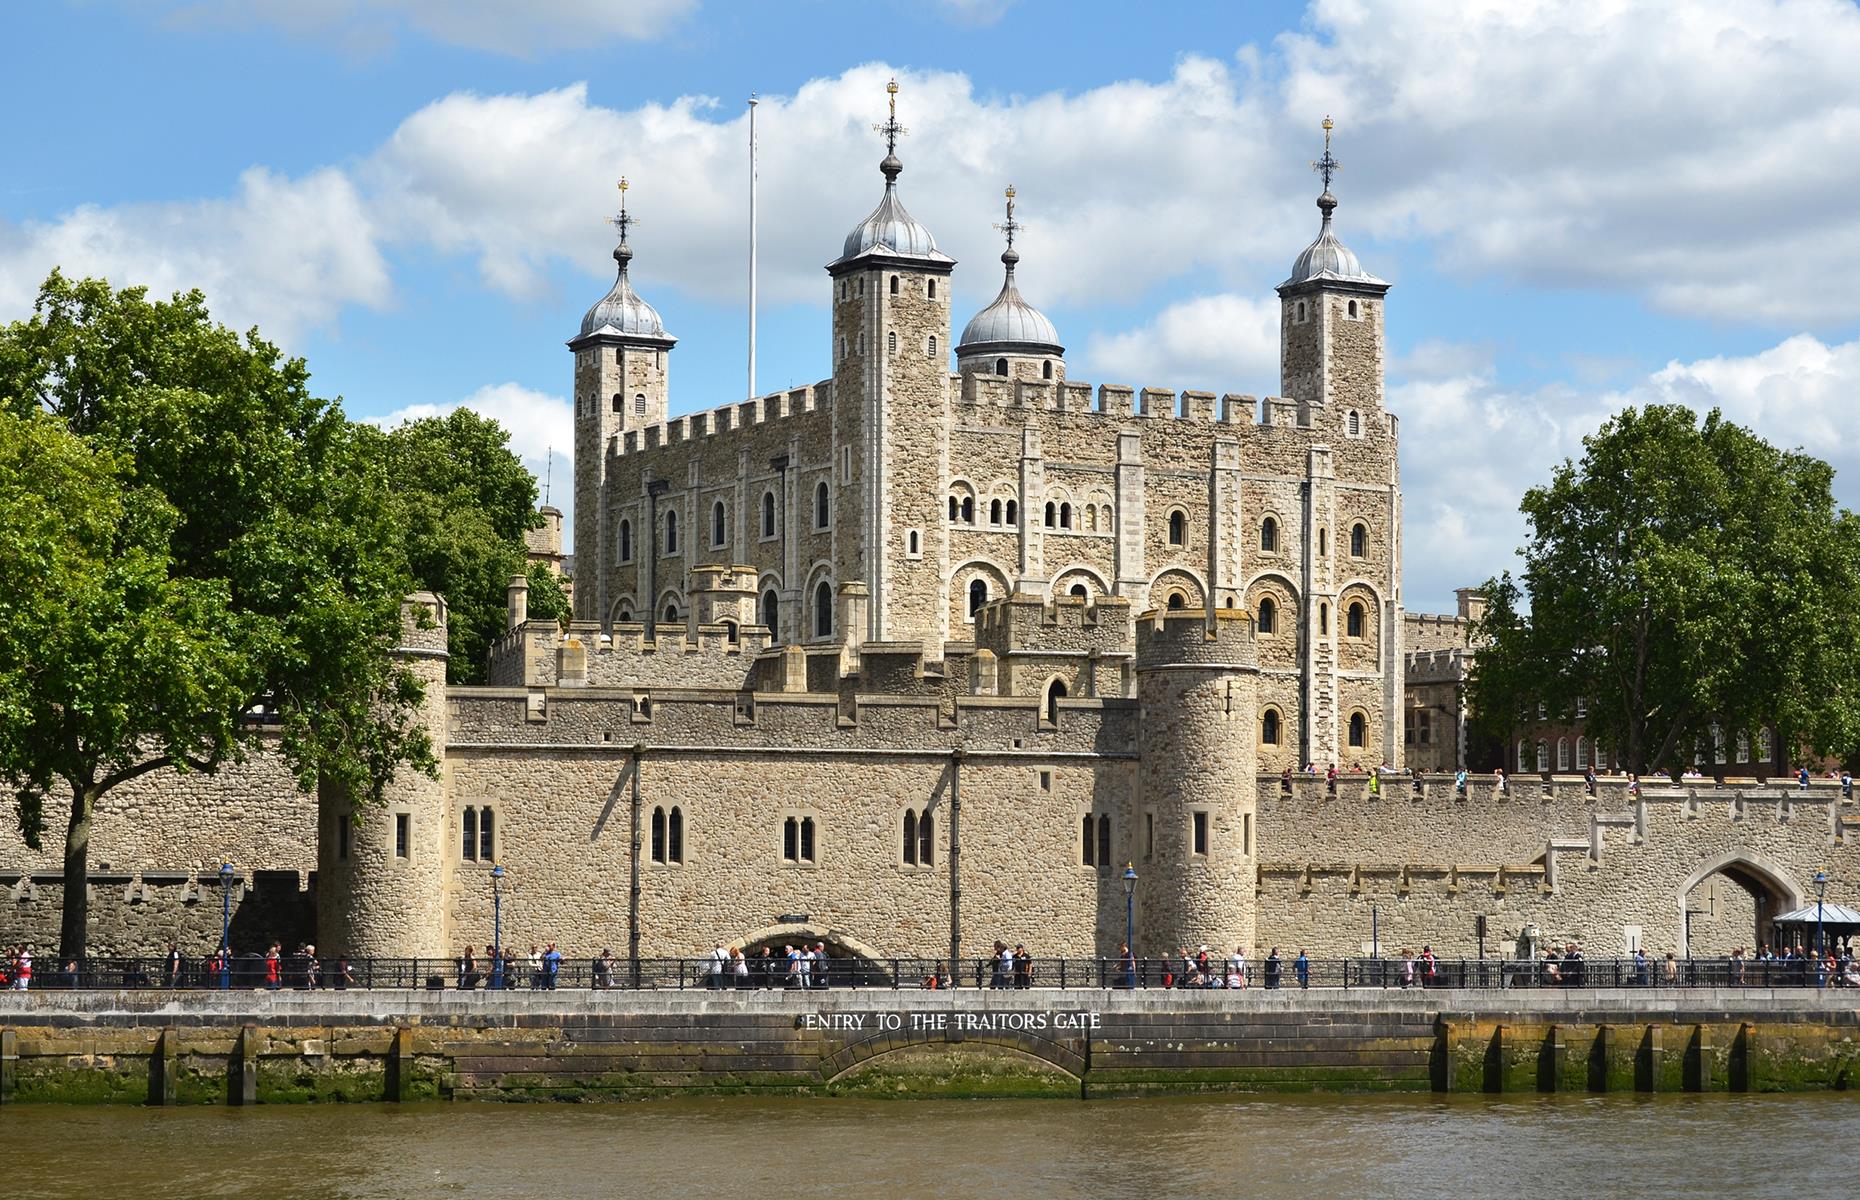 <p>The <a href="https://www.hrp.org.uk/tower-of-london/">Tower of London</a> – an 11th-century fortress brooding at the edge of the Thames – has a notoriously gruesome history peppered with high-profile prisoners and grisly executions. And that blood-spattered history means ghost stories abound today. It's said that Henry VIII's fated second wife, Anne Boleyn, still floats about her execution site on Tower Green. In a strange twist, one 19th-century Yeoman Warder (the tower's guards) also swore he saw the ghost of a mighty bear while he was on duty one night.</p>